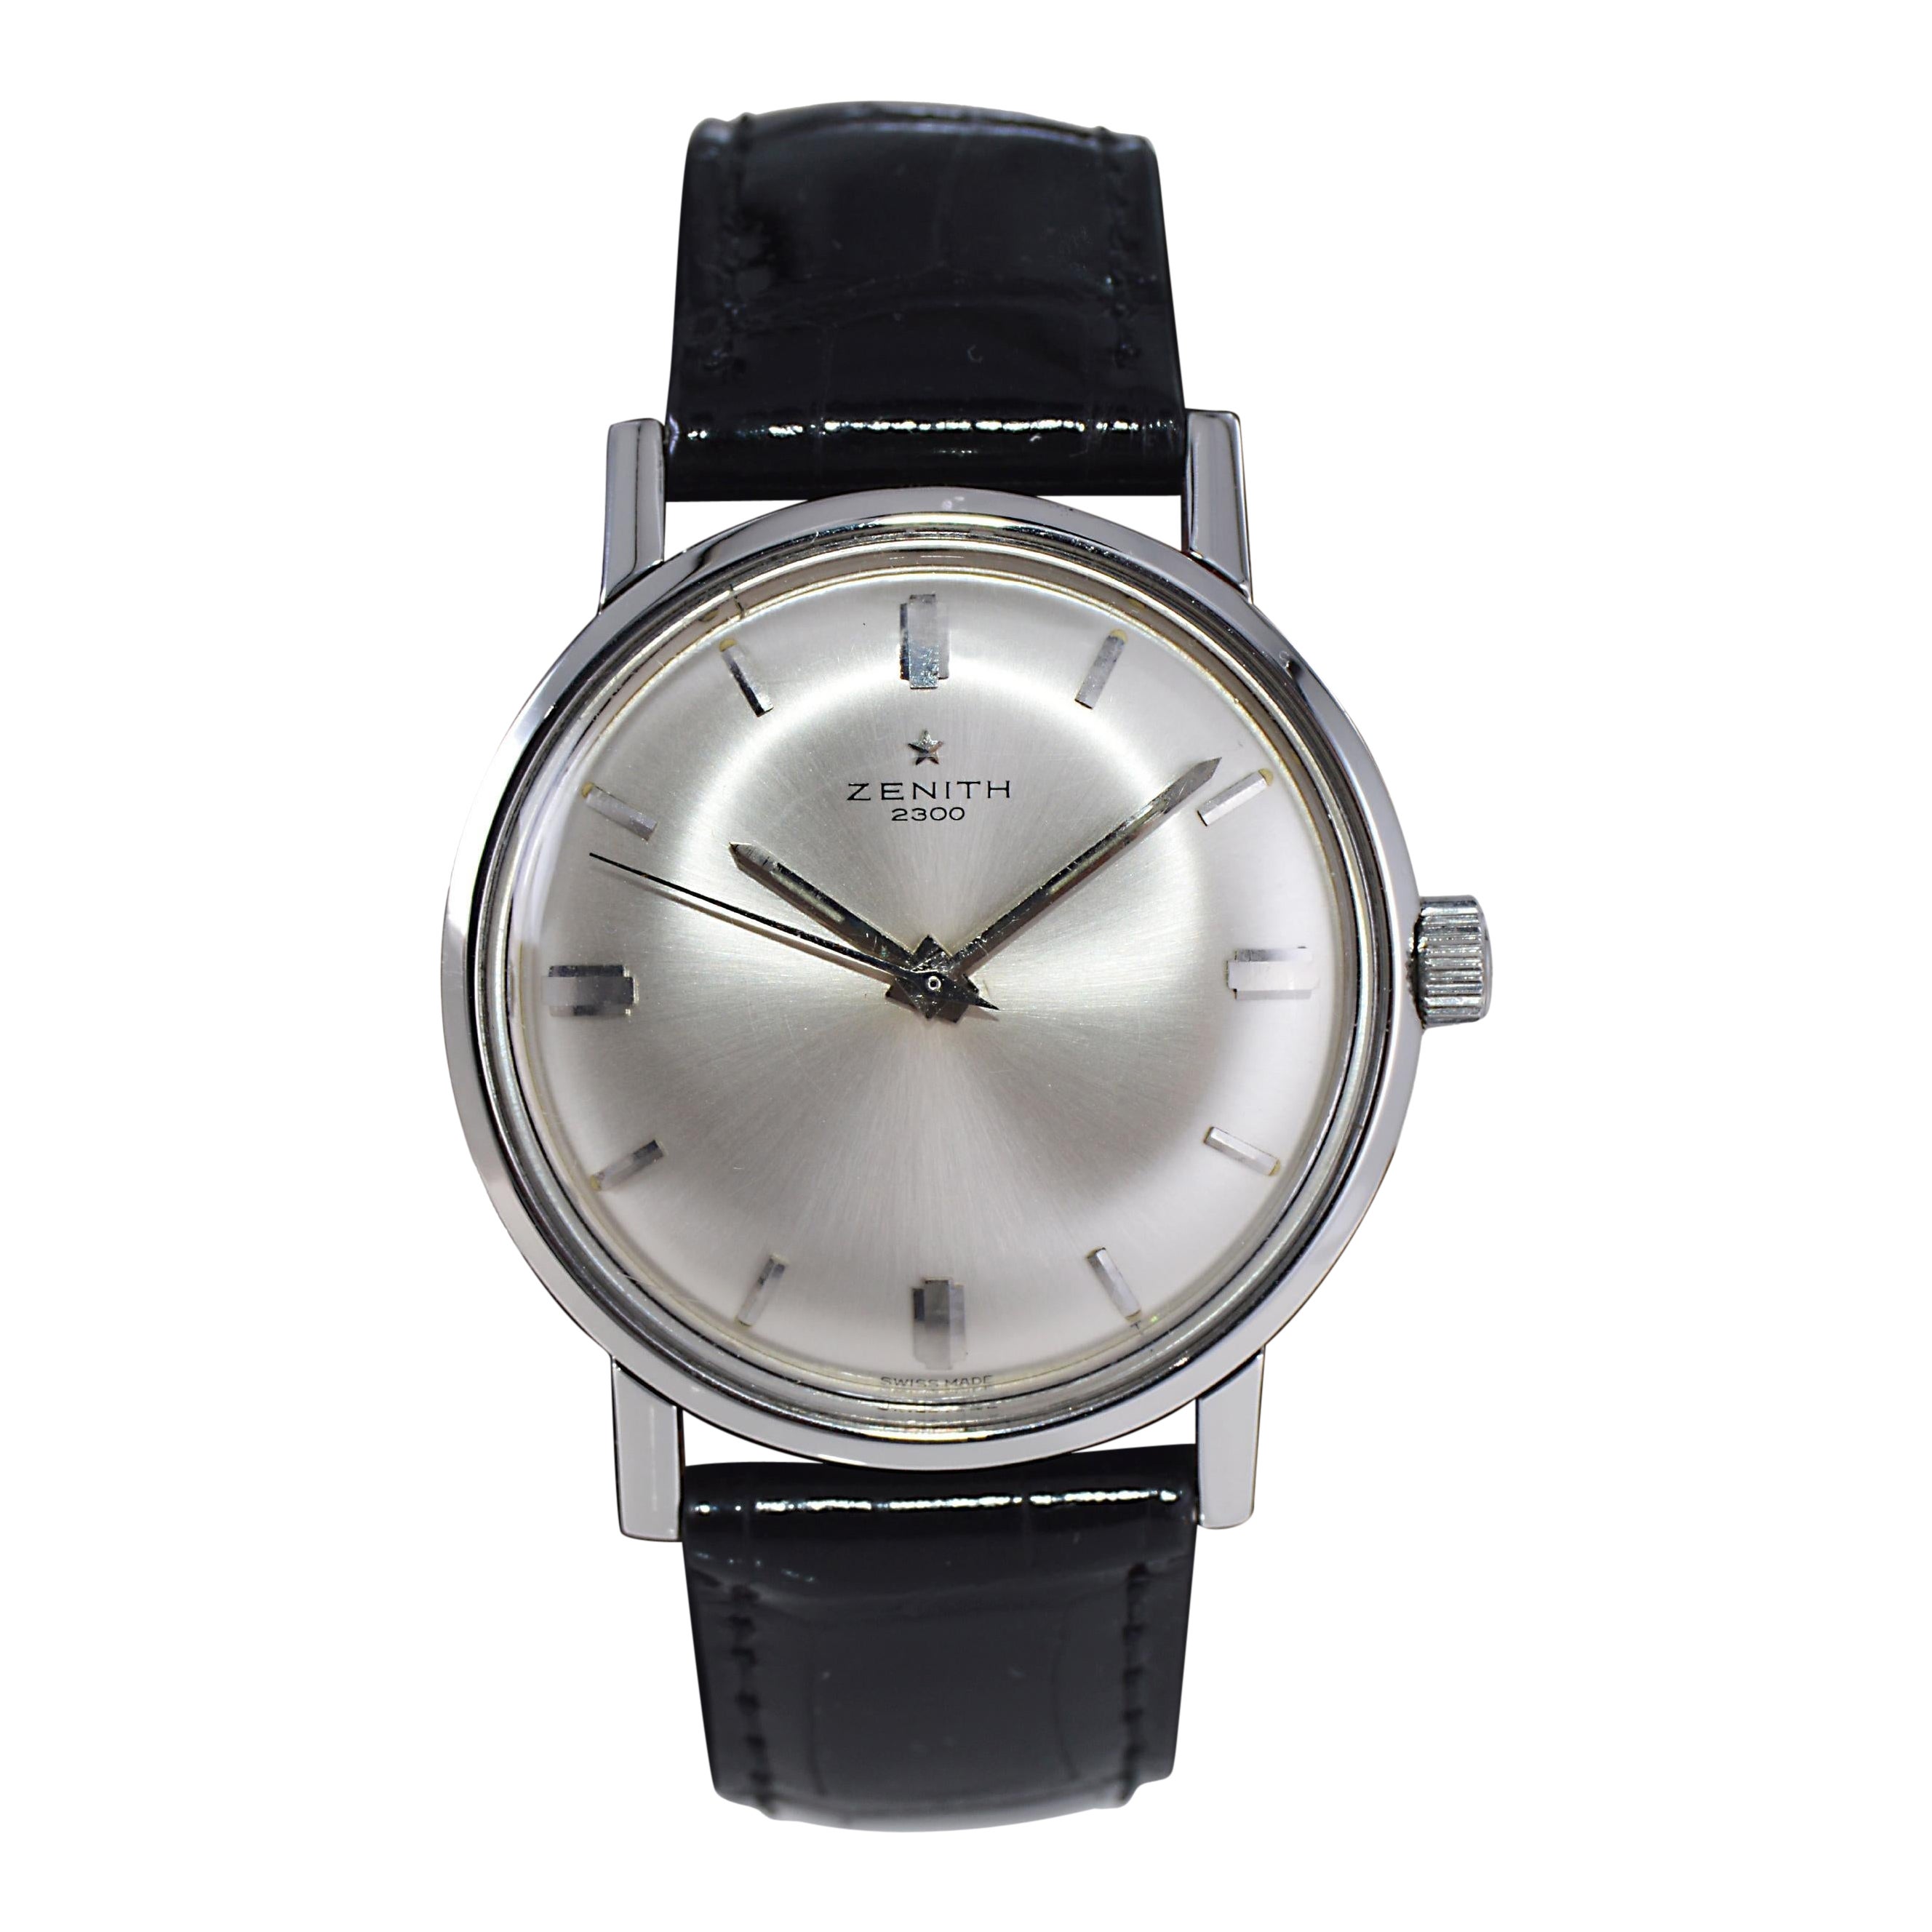 Zenith Stainless Steel Original Dial Manual Wind Watch, circa 1950s For Sale